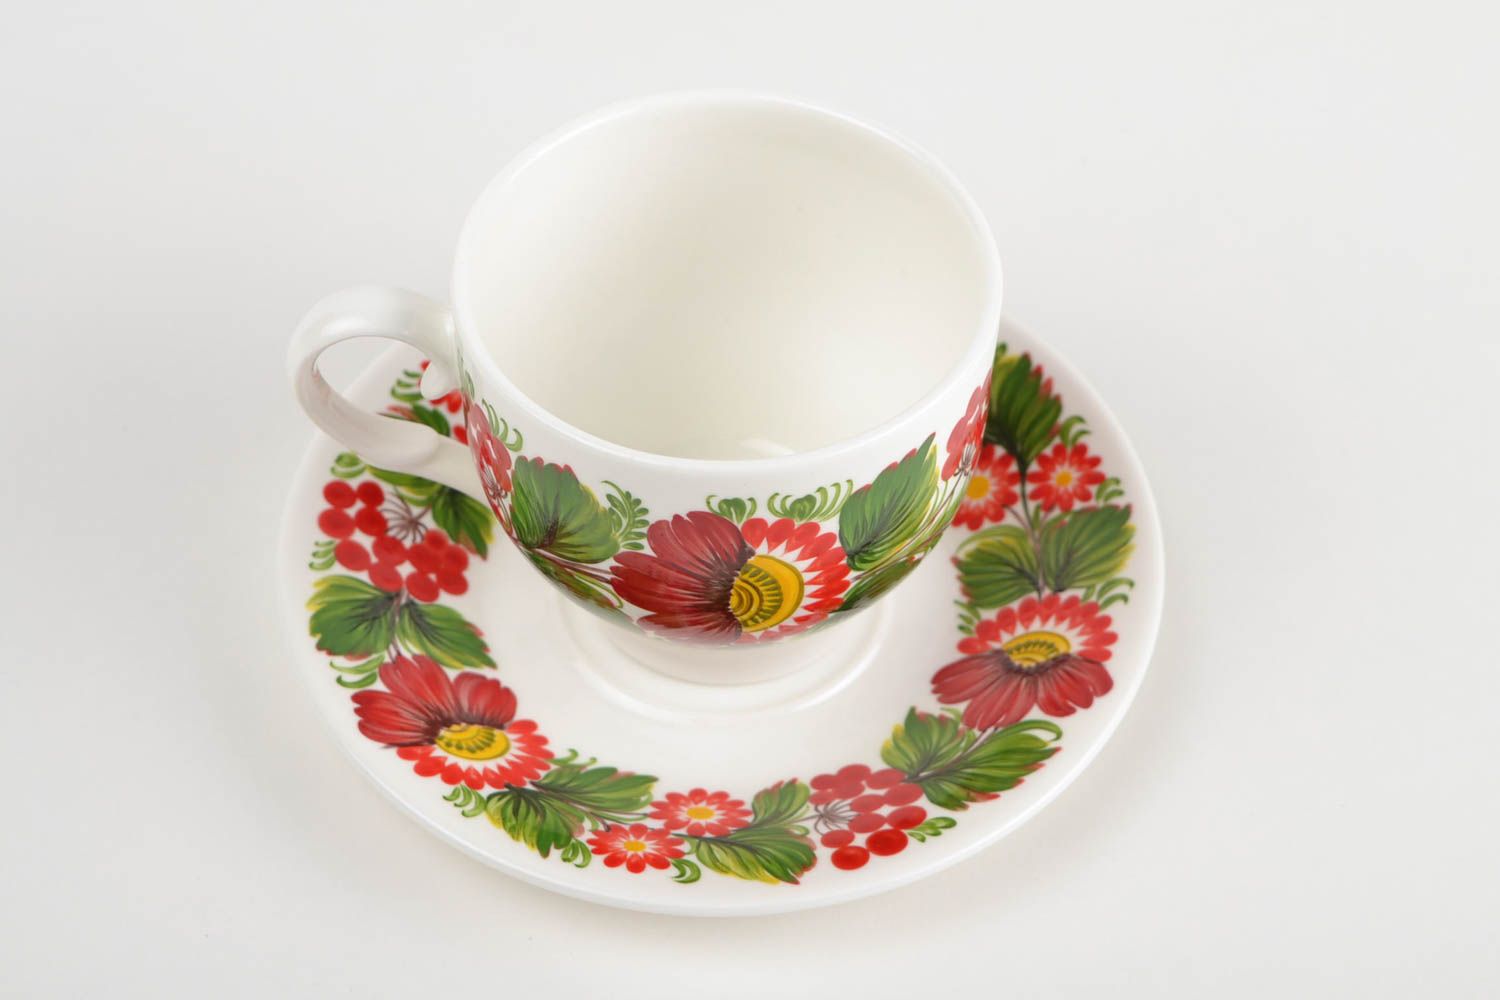 8 oz white porcelain teacup in bright floral red and green colors with handle and saucer photo 5